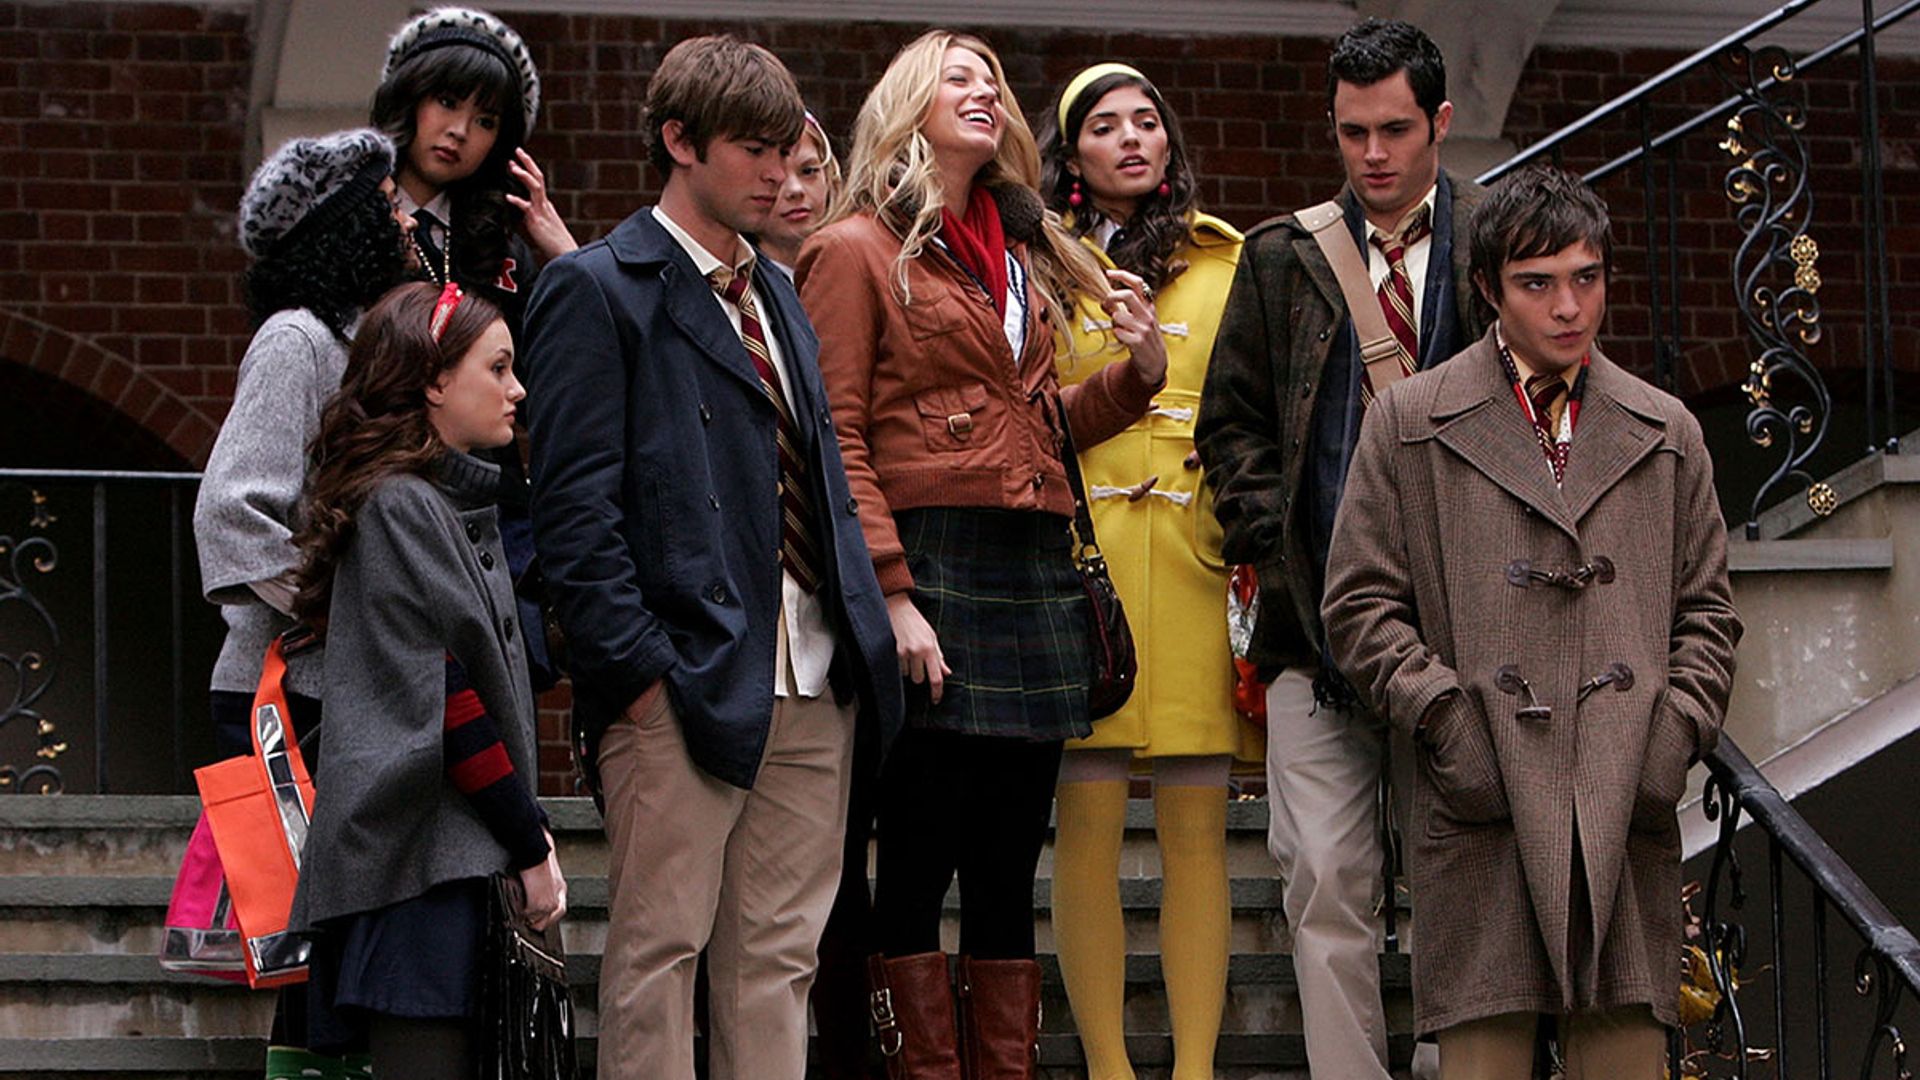 gossip girl cast then and now